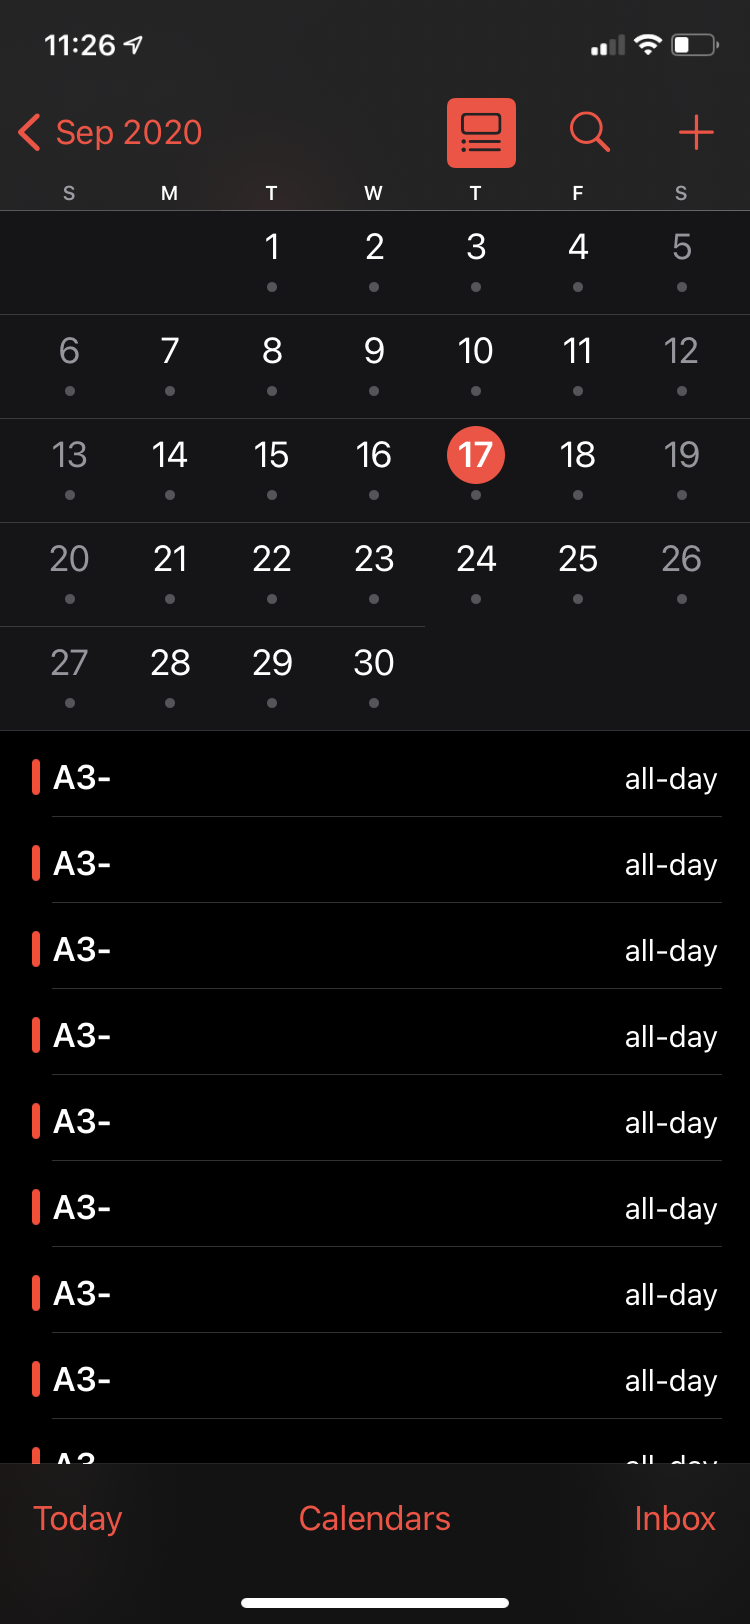 iOS 14 calendar problem / issue after upd… Apple Community